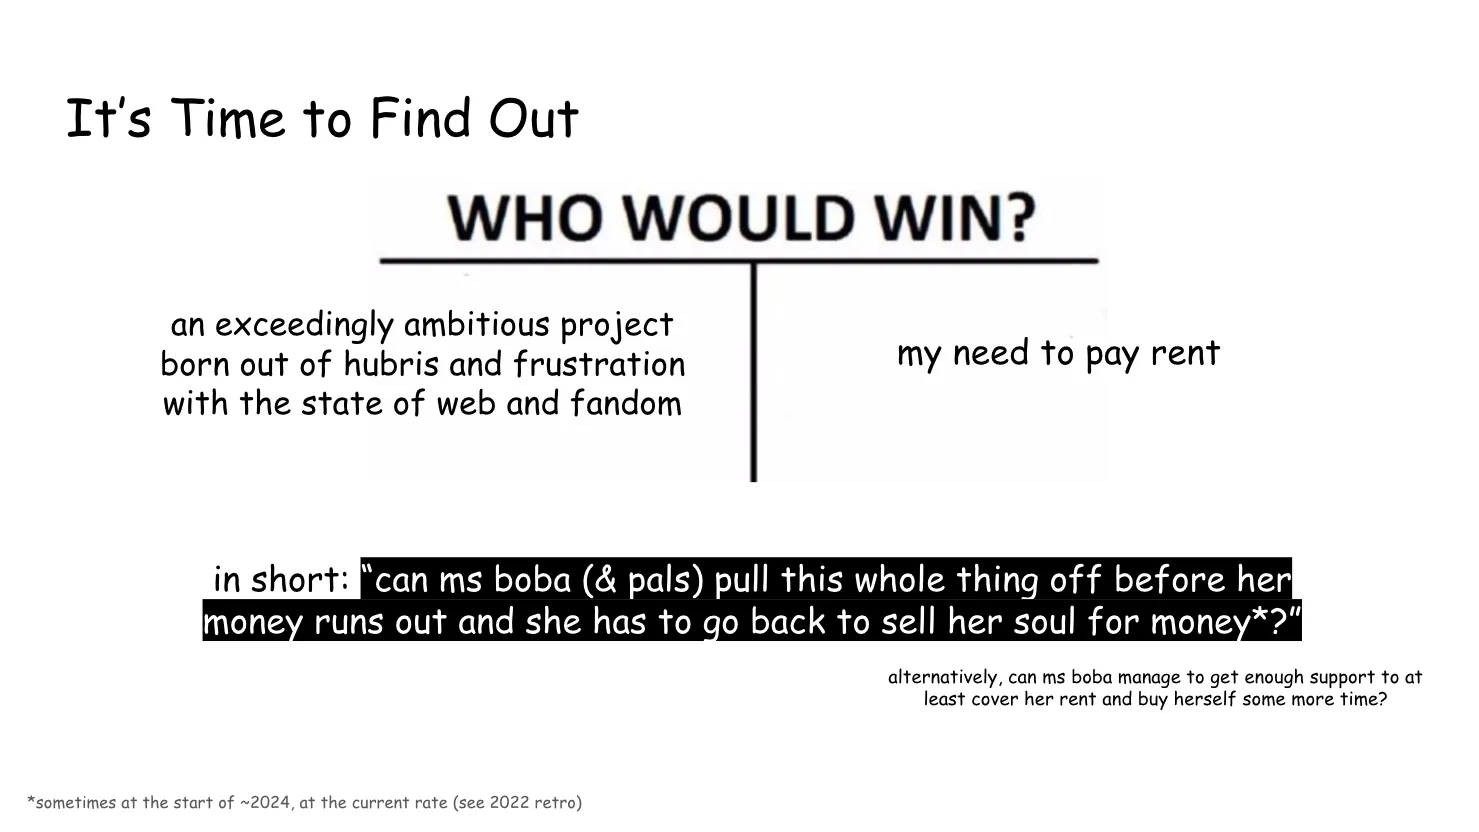 Slide 13:

It’s Time to Find Out

The slide is set up as the "WHO WOULD WIN?" meme, pitting "an exceedingly ambitious project born out of hubris and frustration with the state of web and fandom
" against "my need to pay rent"

in short: “can ms boba (& pals) pull this whole thing off before her money runs out and she has to go back to sell her soul for money?” (sometime at the start of ~2024, at the current rate (see 2022 retro))

alternatively, can ms boba manage to get enough support to at least cover her rent and buy herself some more time?